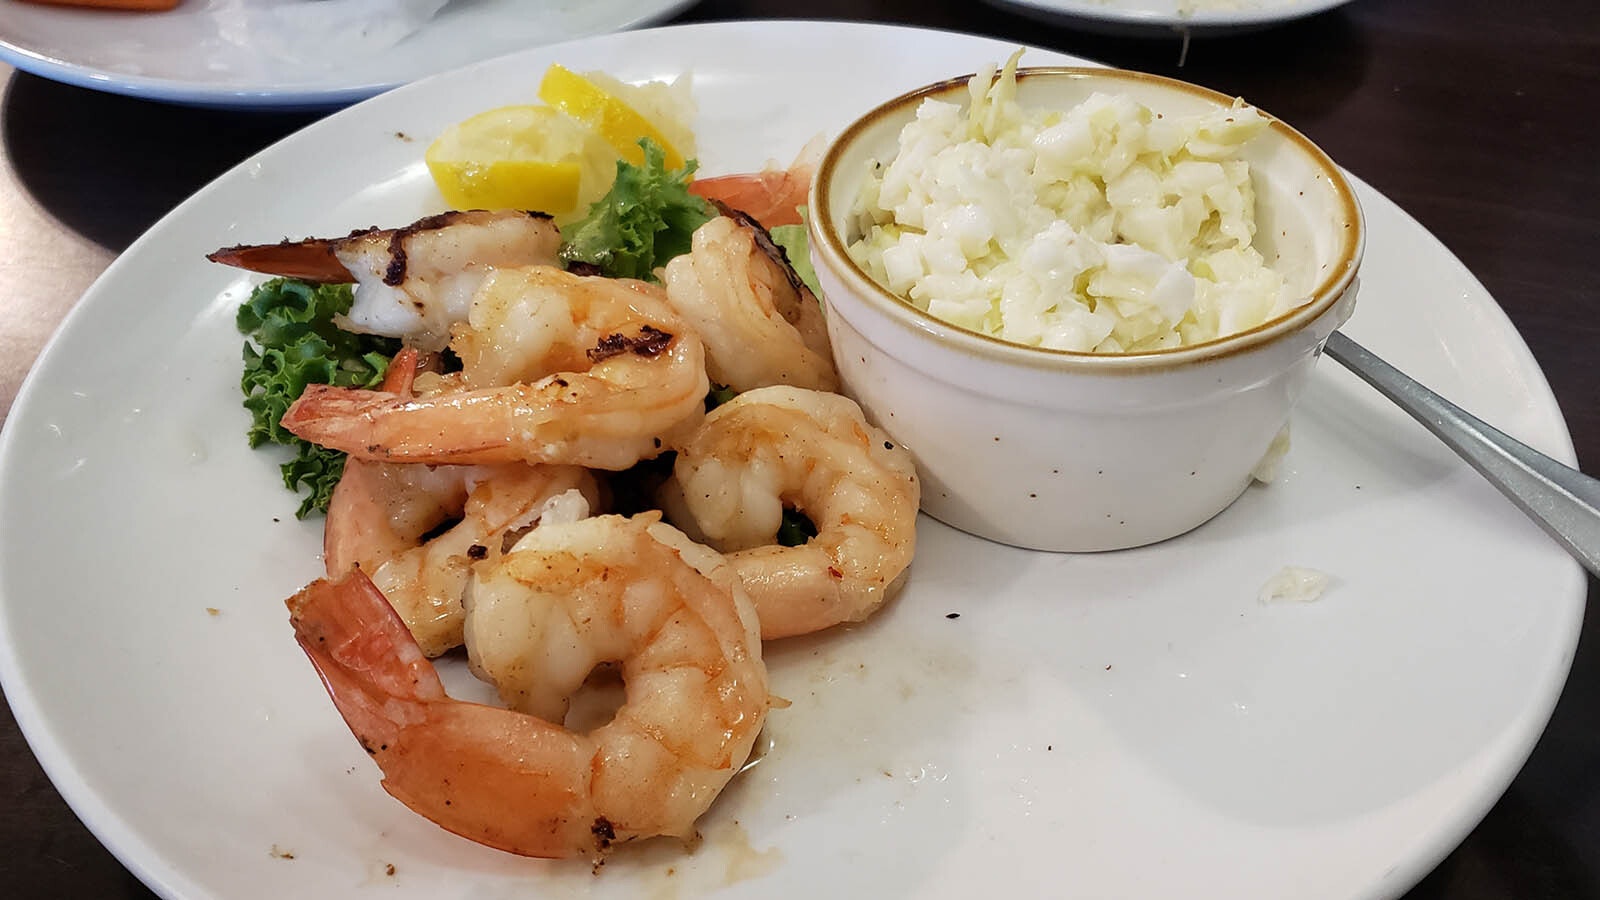 Another light lunch option, grilled shrimp with coleslaw.